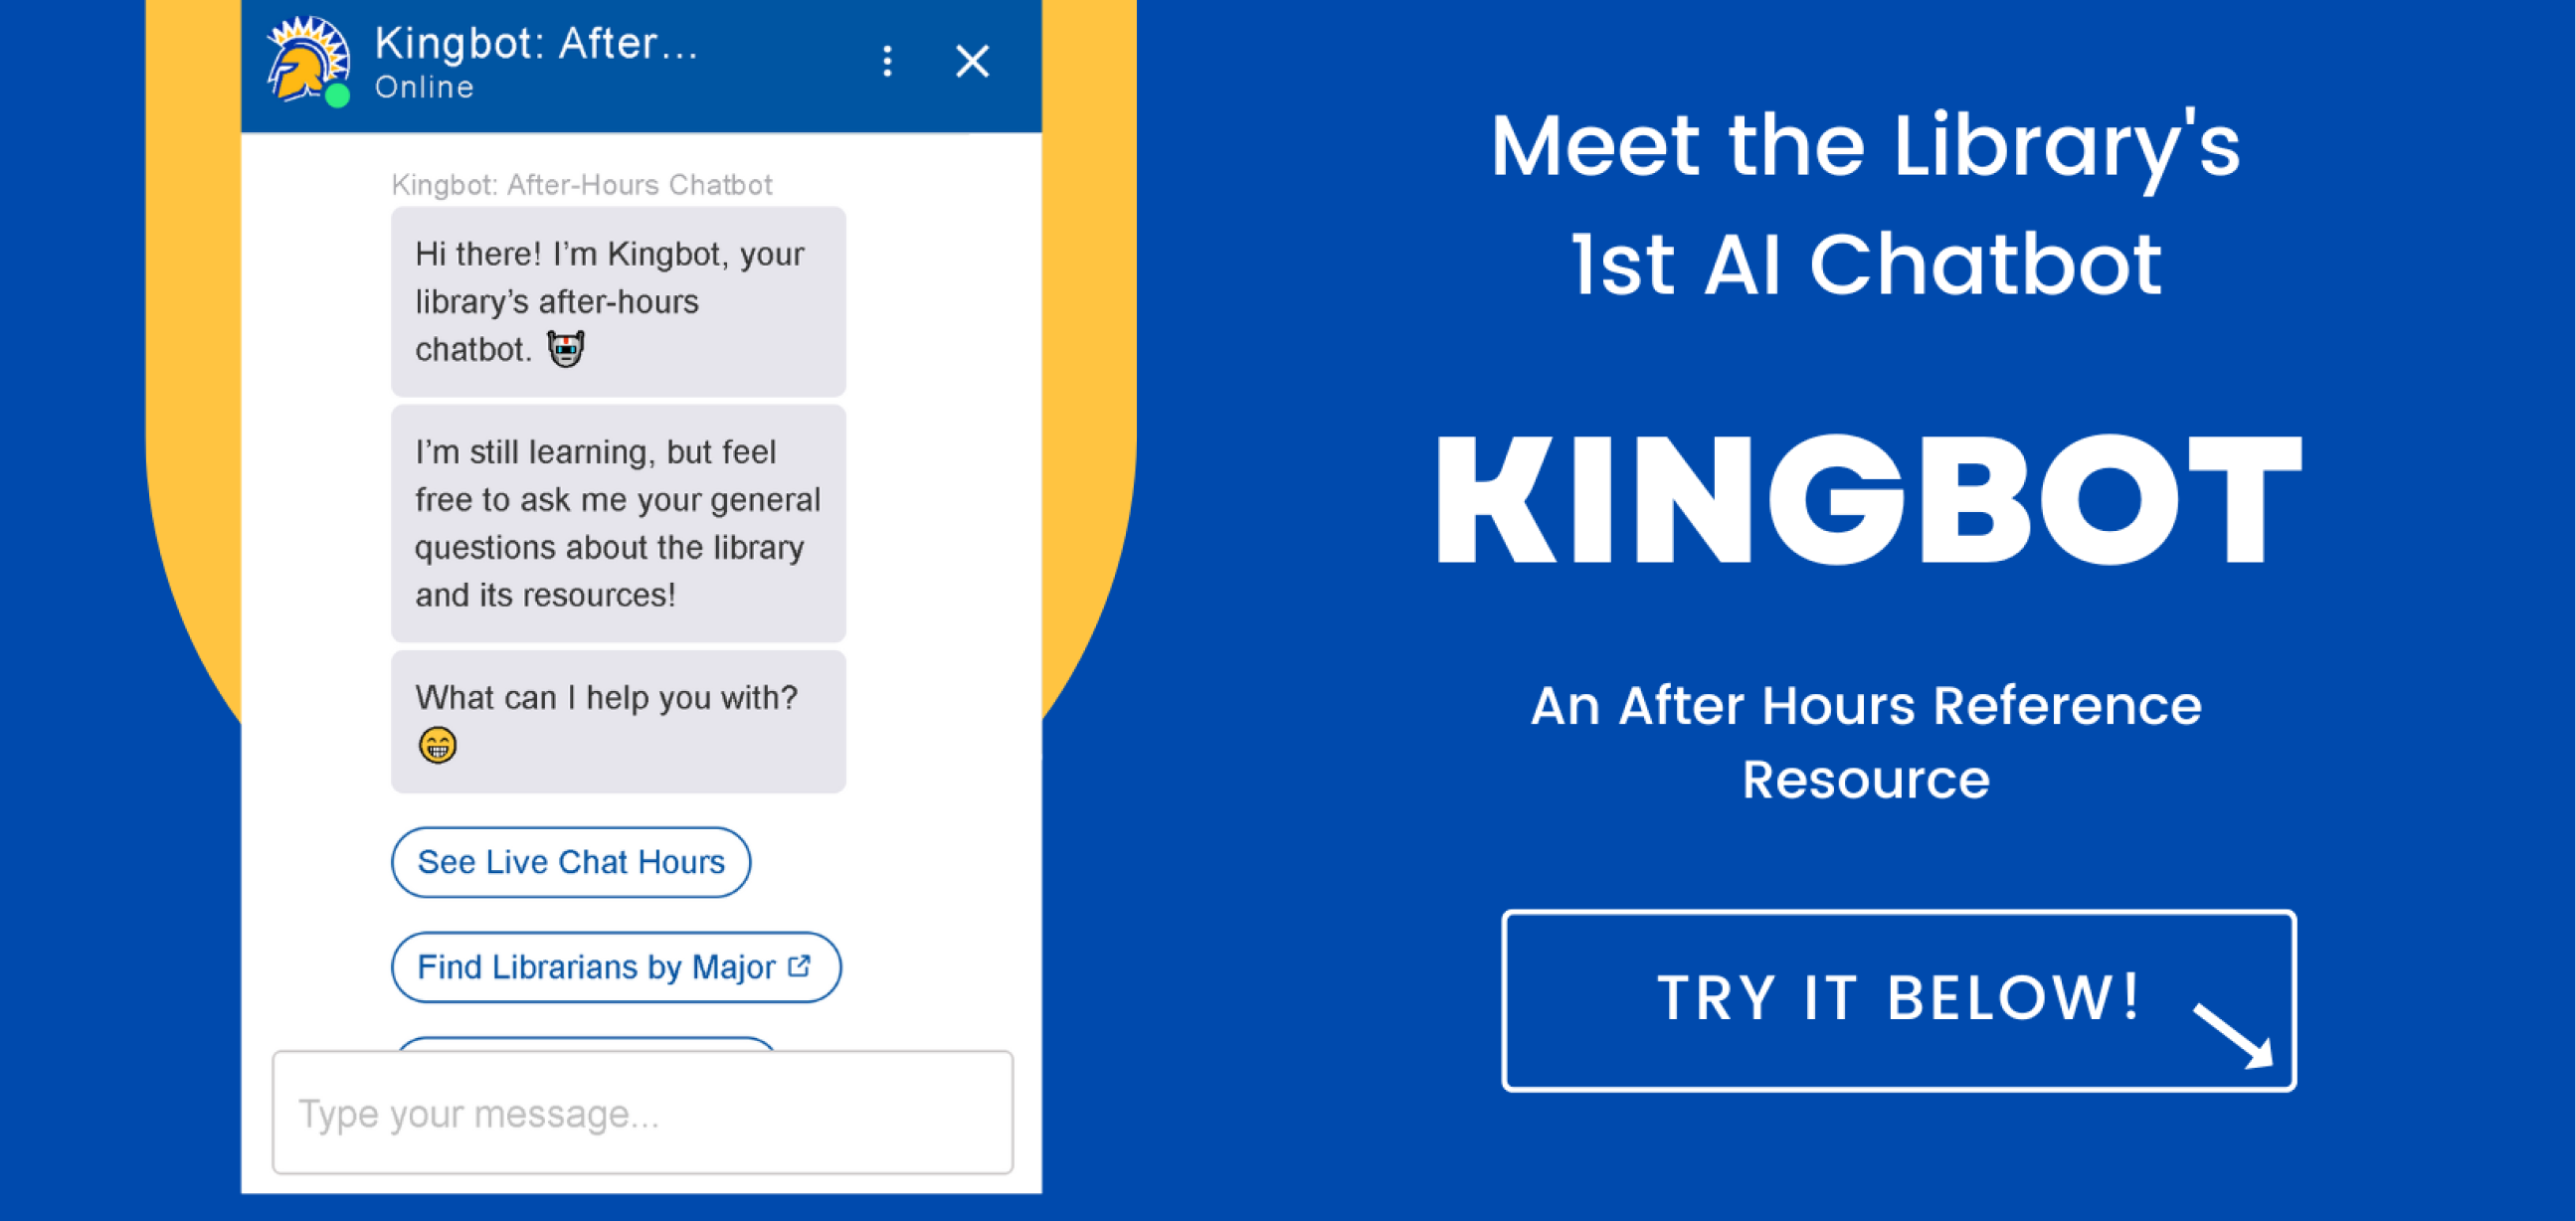 Kingbot, The Library's After-Hours AI Chatbot